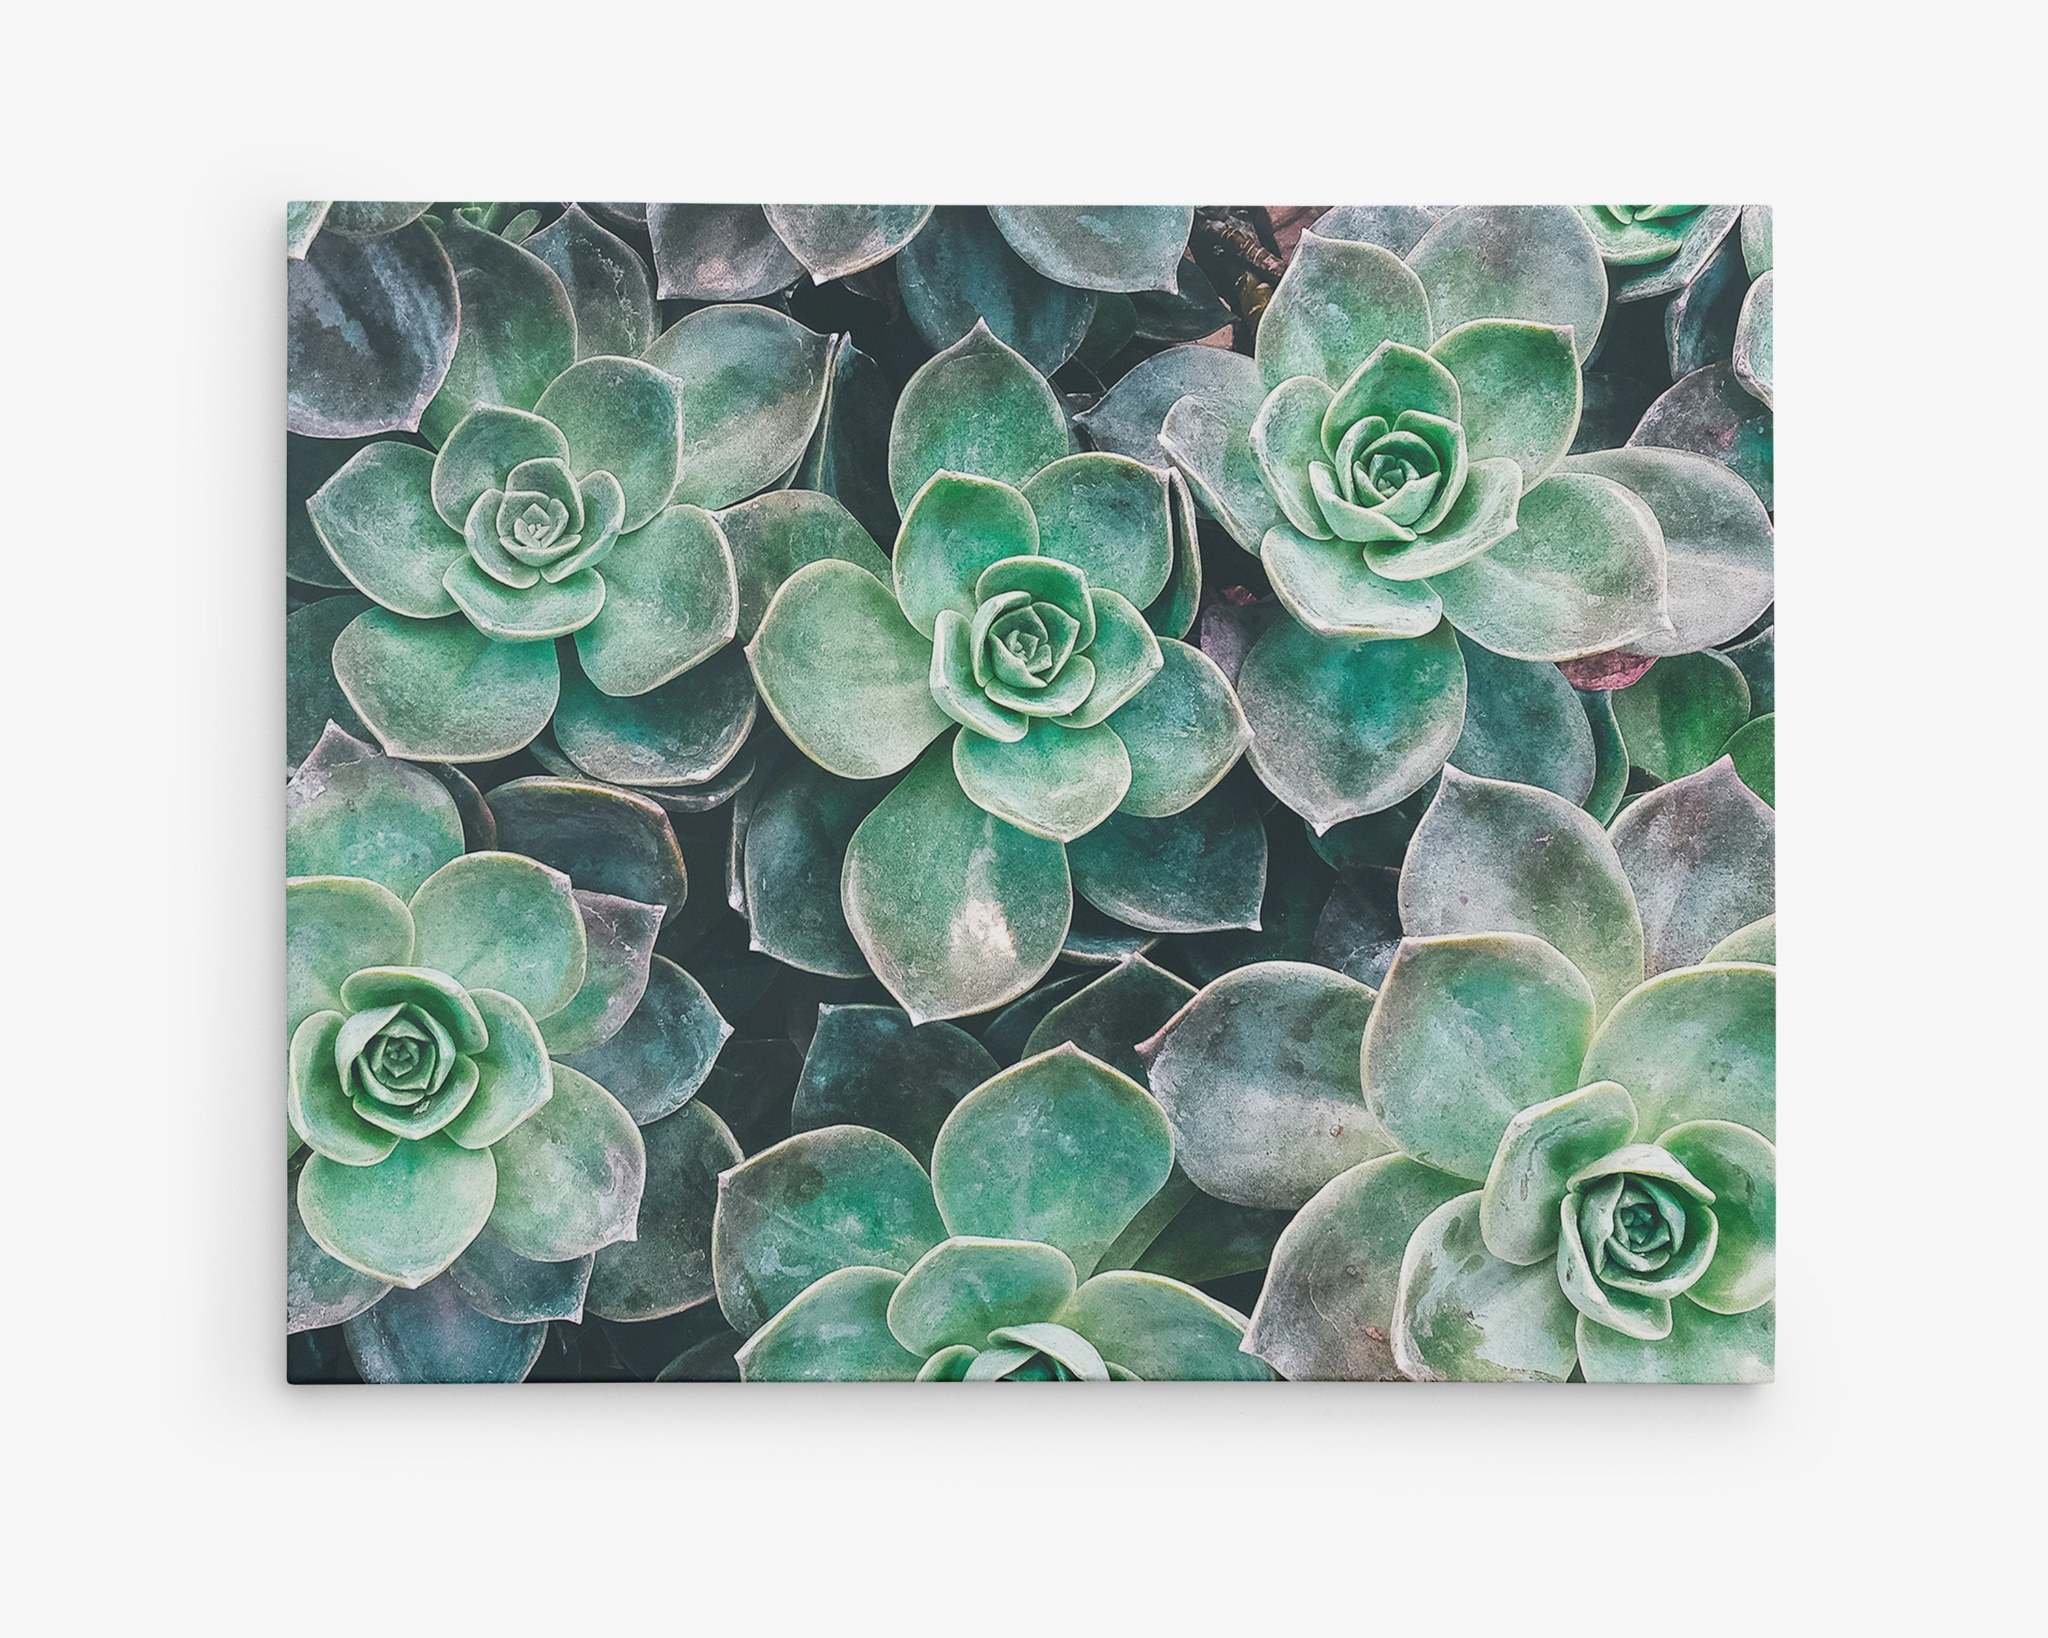 A close-up image of green succulent plants with thick, fleshy leaves arranged in a rosette pattern. The leaves have a gradient of colors, from light green in the center to darker green on the edges. This botanical print would look stunning as Fresh Green Succulent Canvas Wall Art, &#39;Bed of Succulents&#39; by Offley Green, perfect for adding nature&#39;s beauty to any space. The background is filled with overlapping succulent plants.